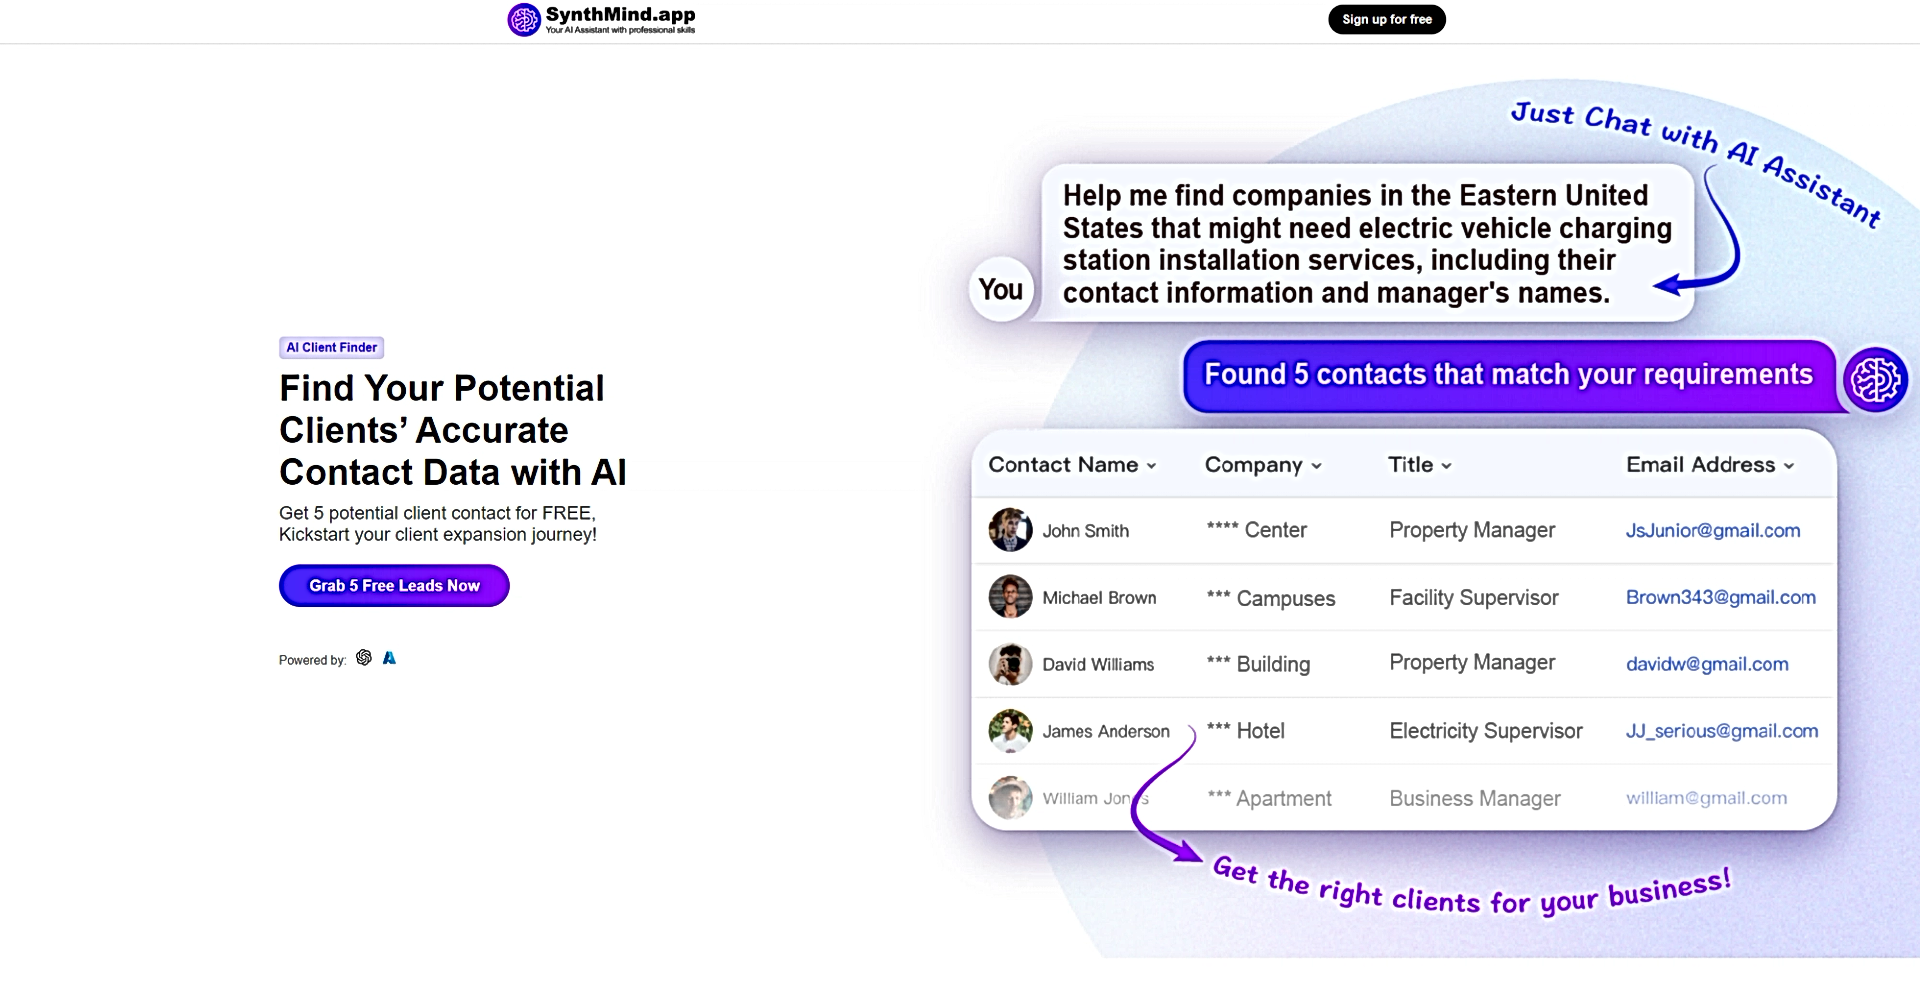 AI Client Finder featured